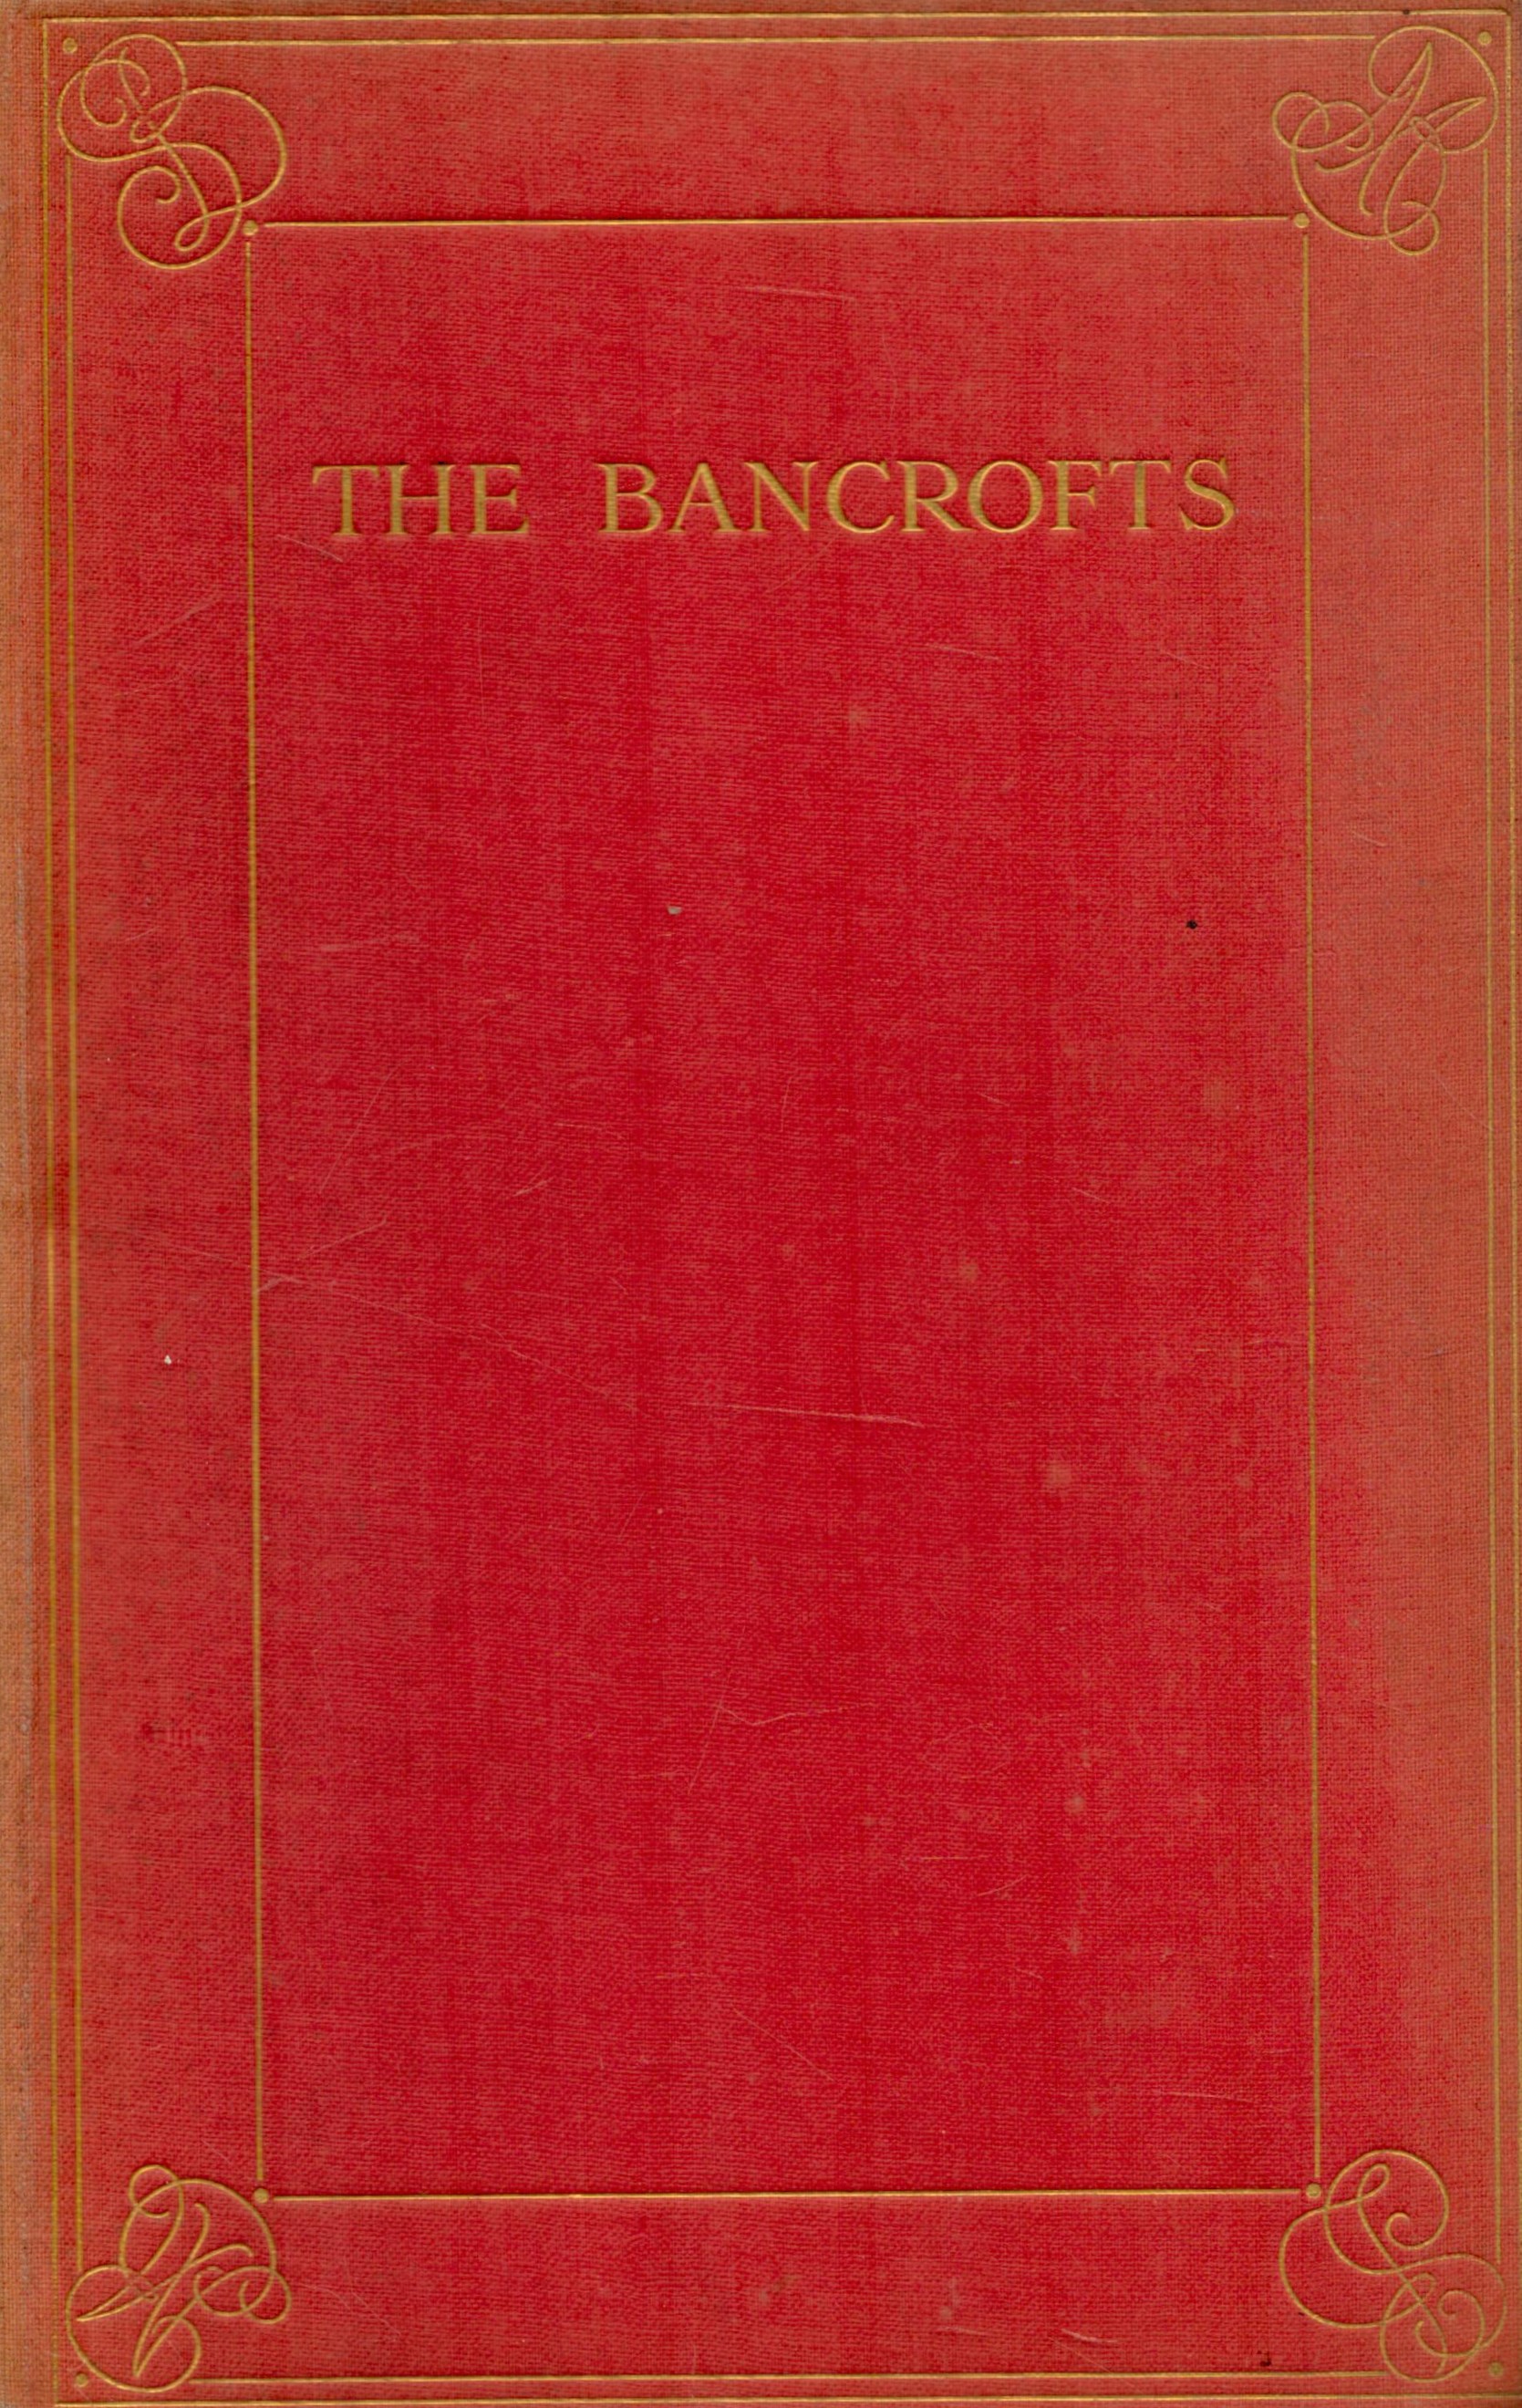 The Bancrofts. Recollections of sixty years. 'Shadows of the things that have been'. With